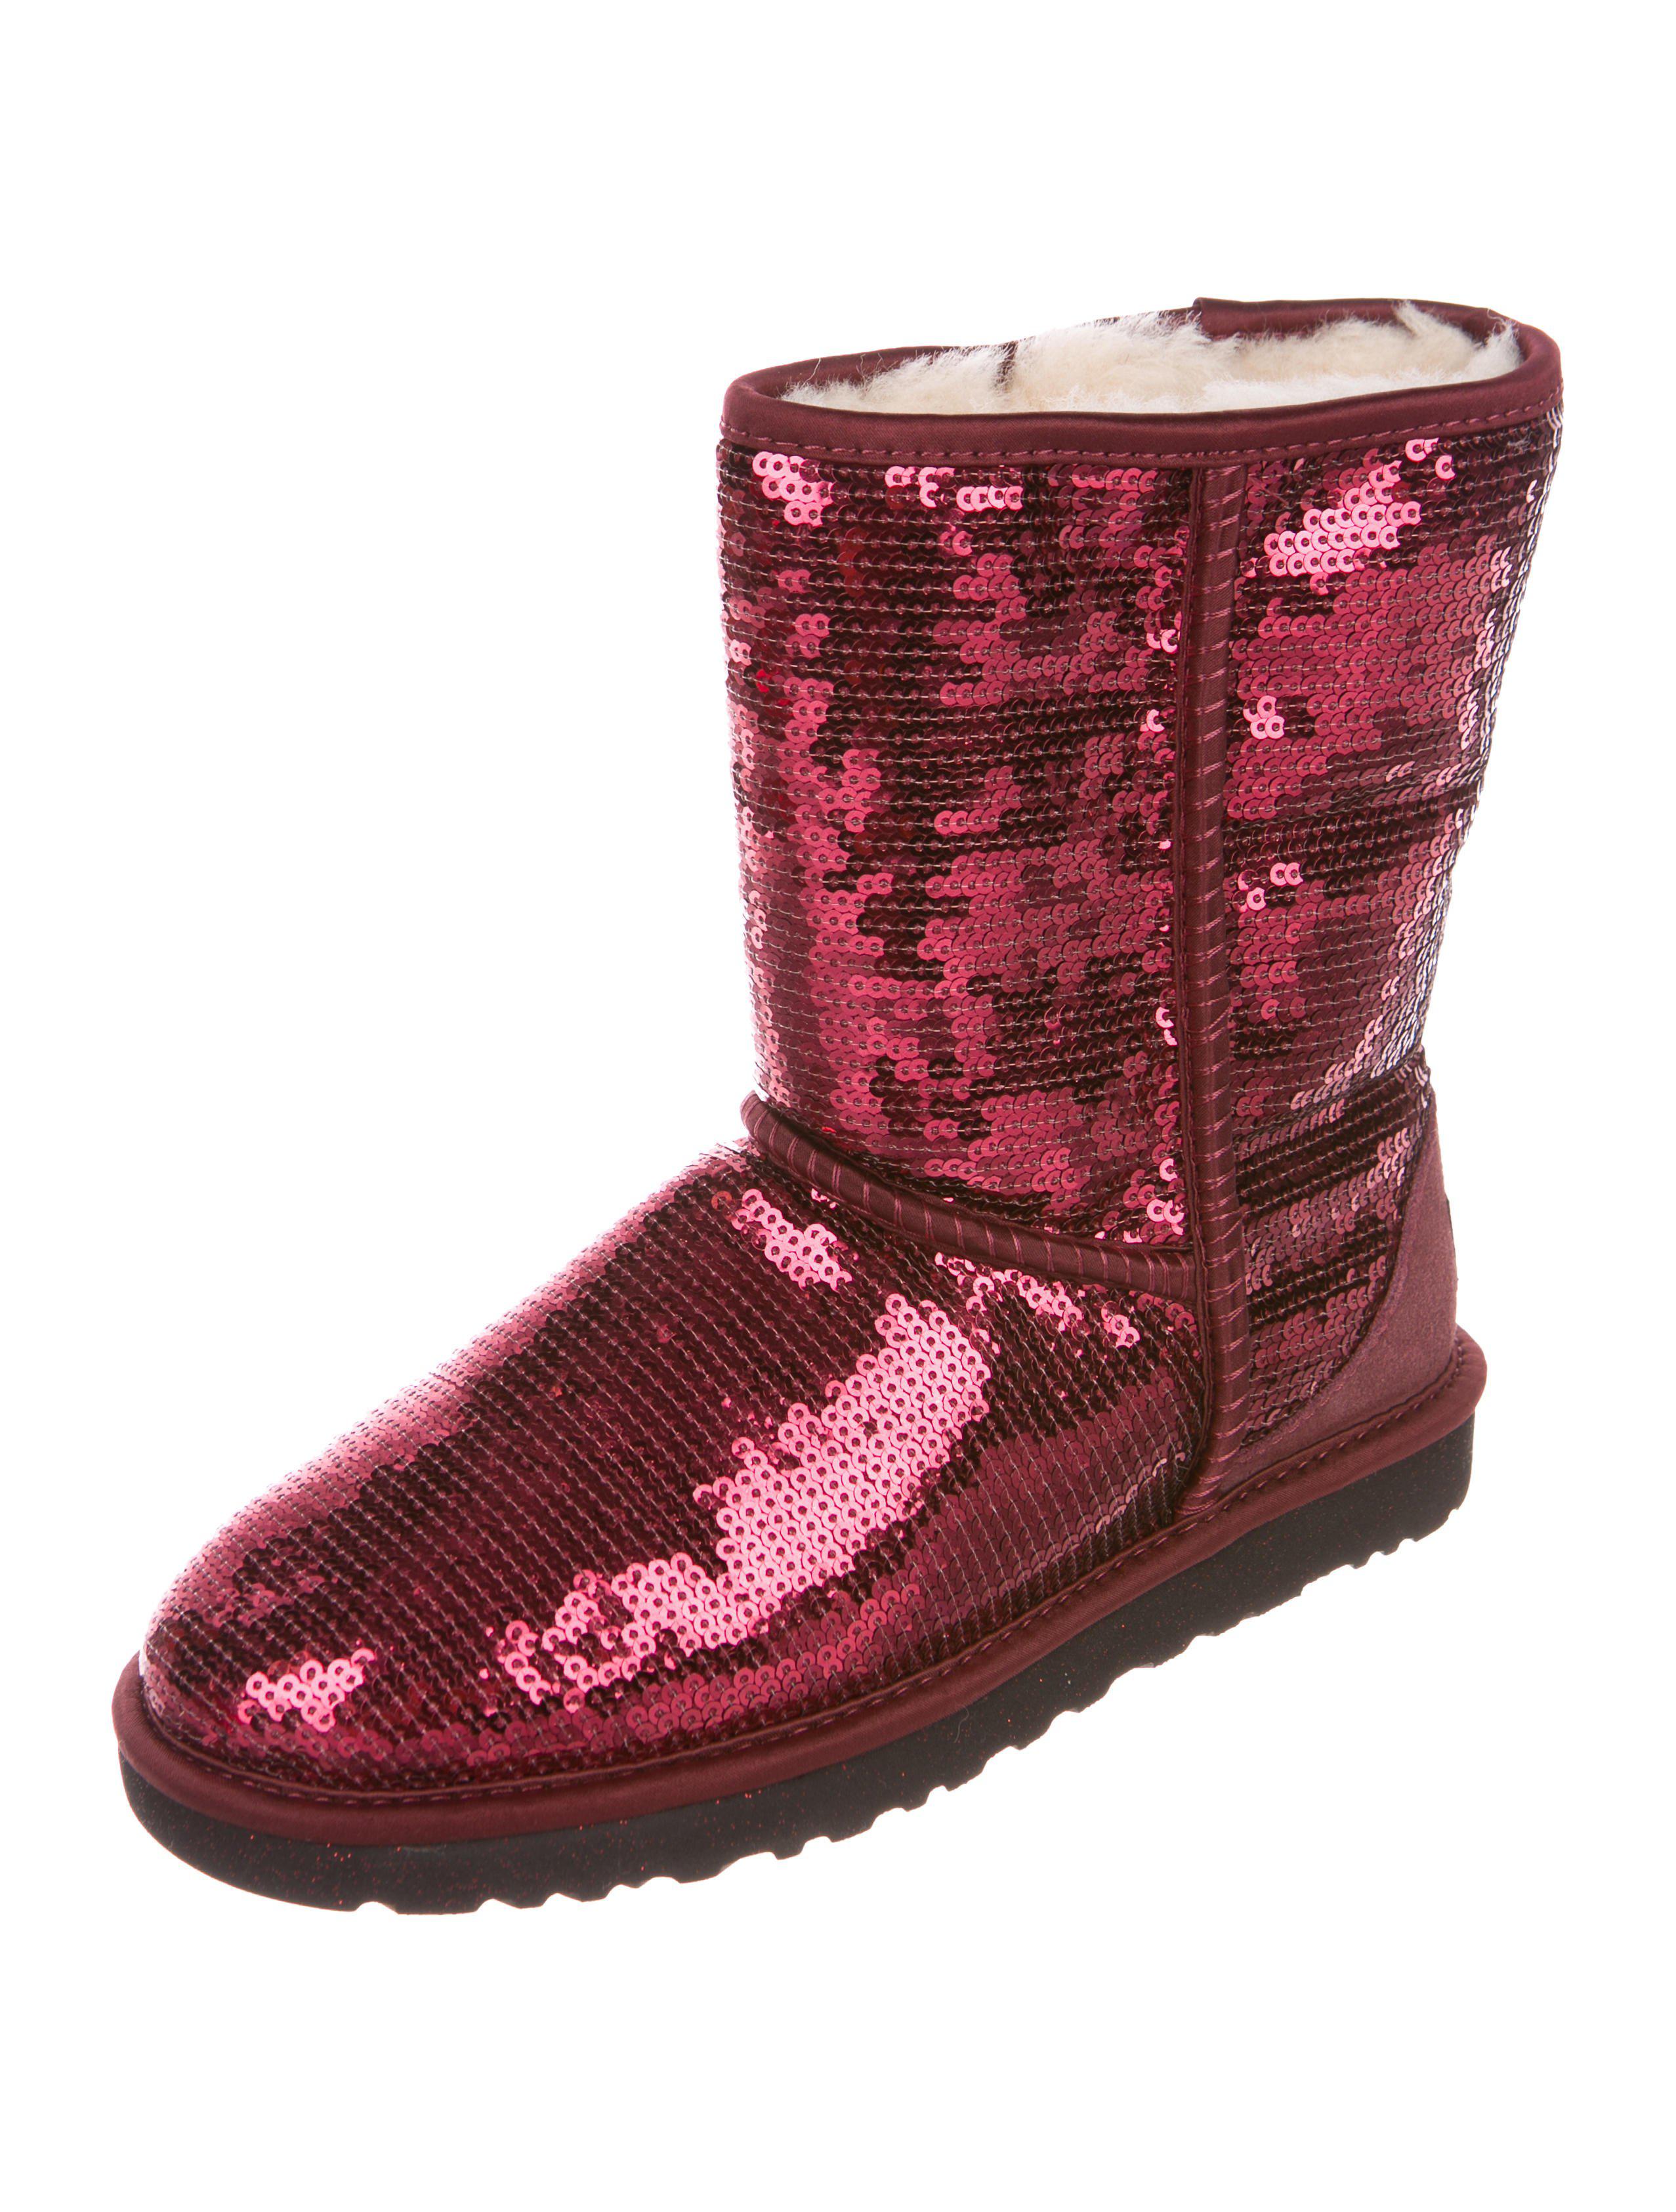 Lyst - Ugg Sequin Classic Short Boots W/ Tags in Pink